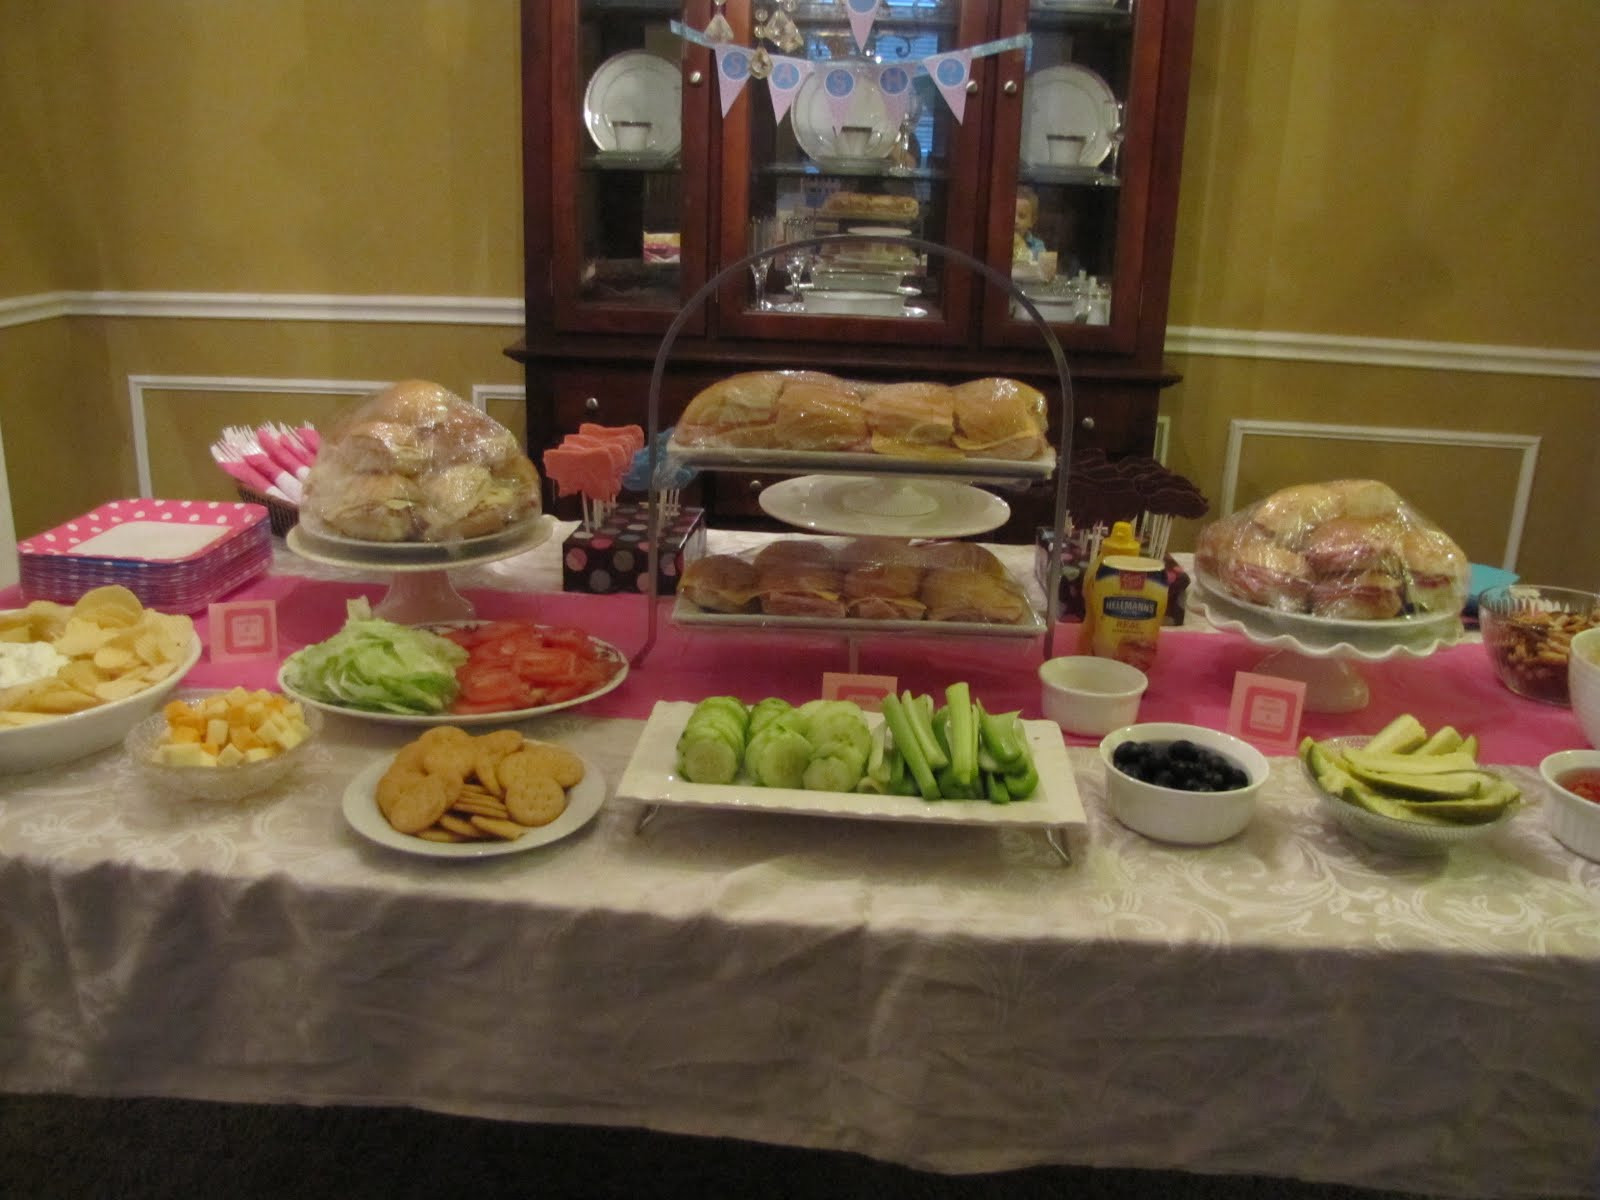 Food Ideas For Baby Gender Reveal Party
 lil Mop Top Stache or Sash Gender Reveal Party